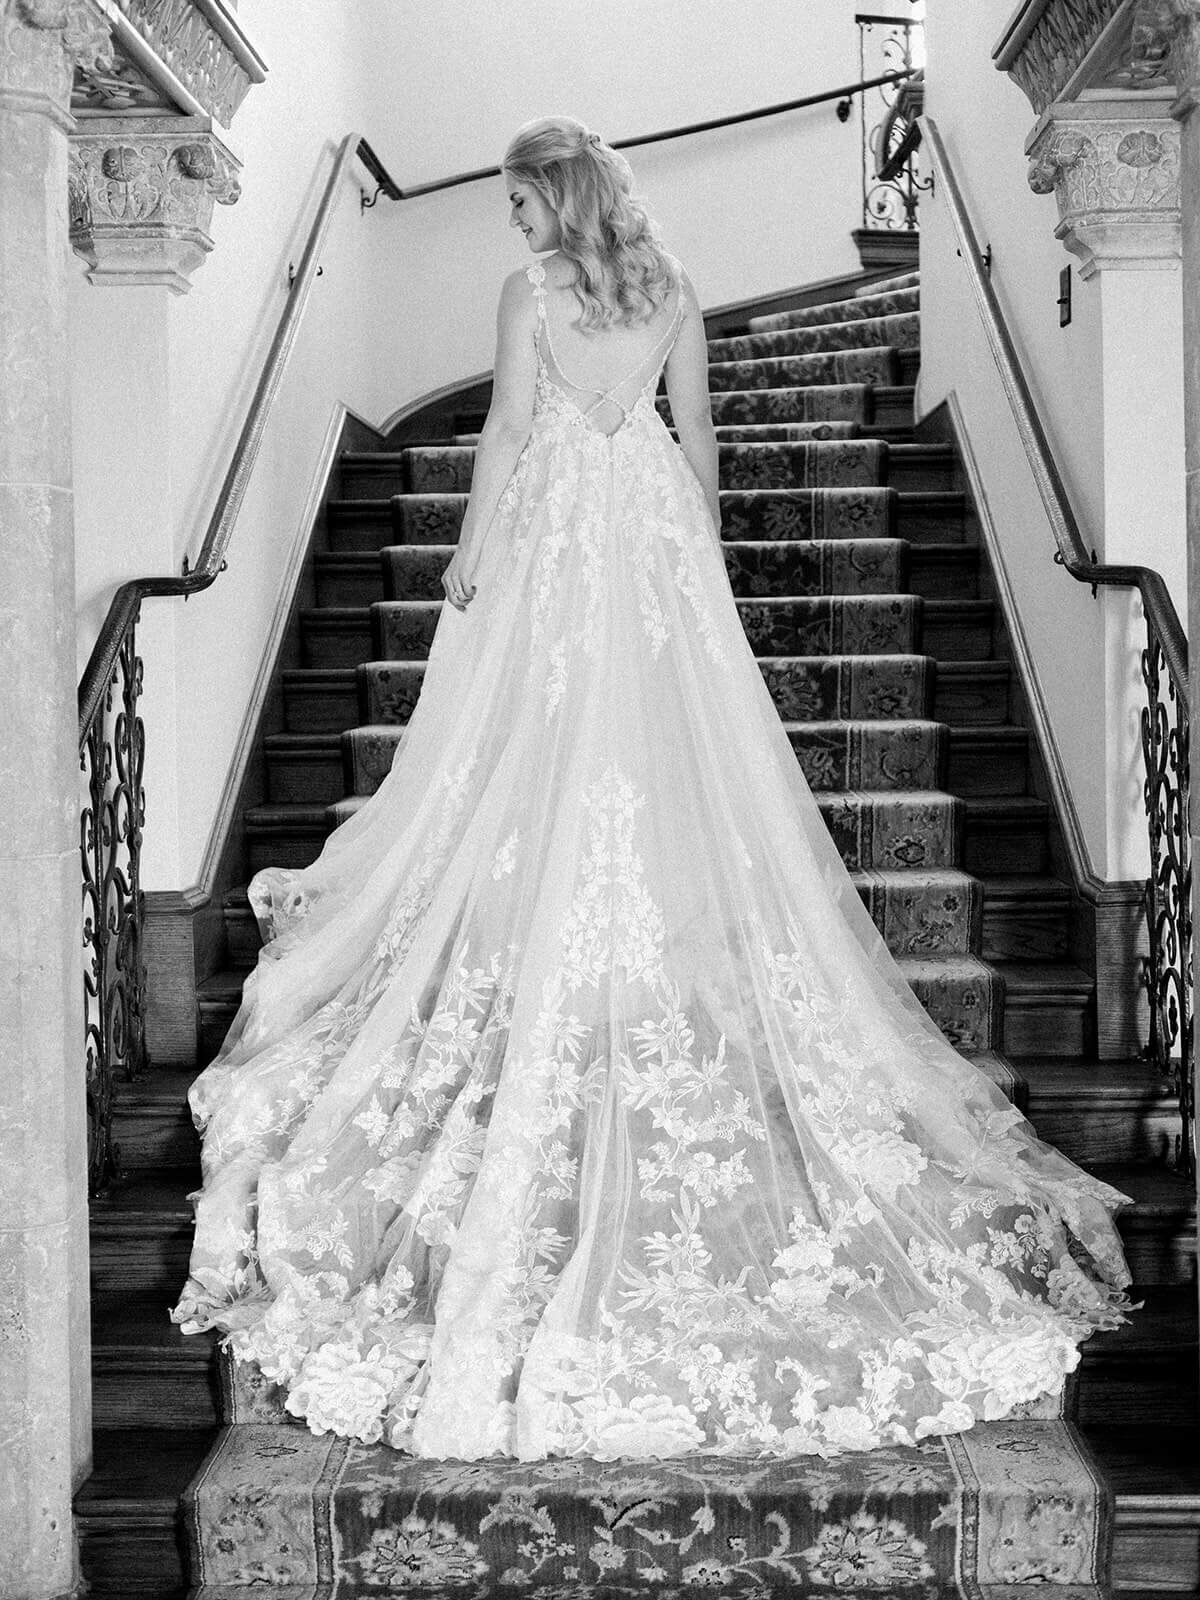 Bridal portrait standing on stairs with full wedding dress detail